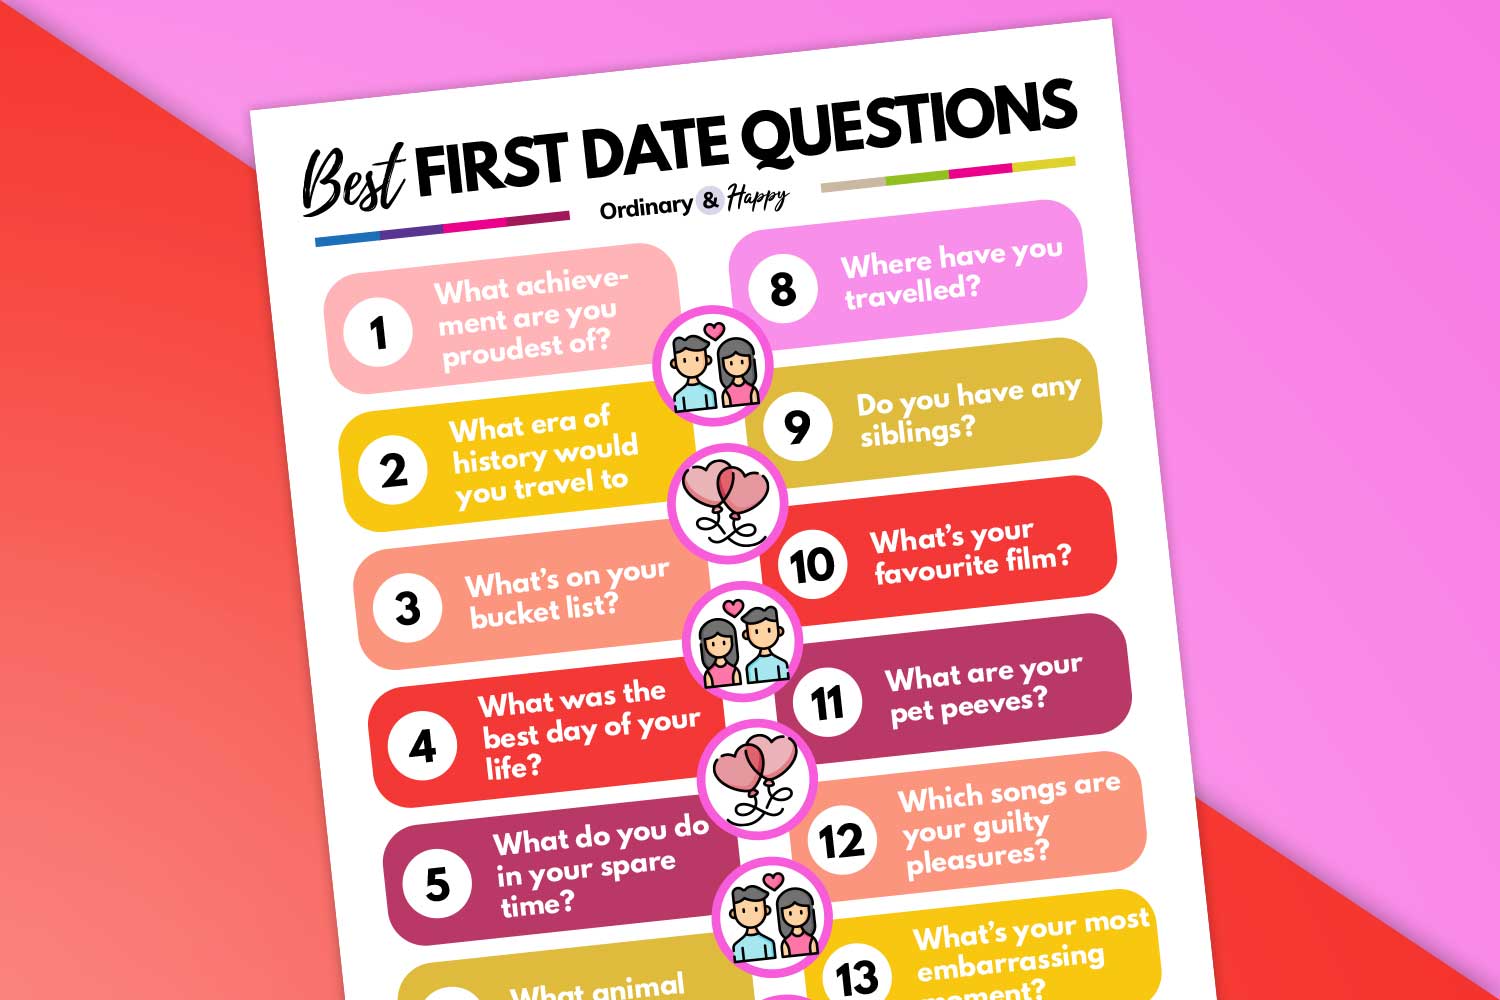 42 Best First Date Questions to Ask (the Ultimate List) - Ordinary and